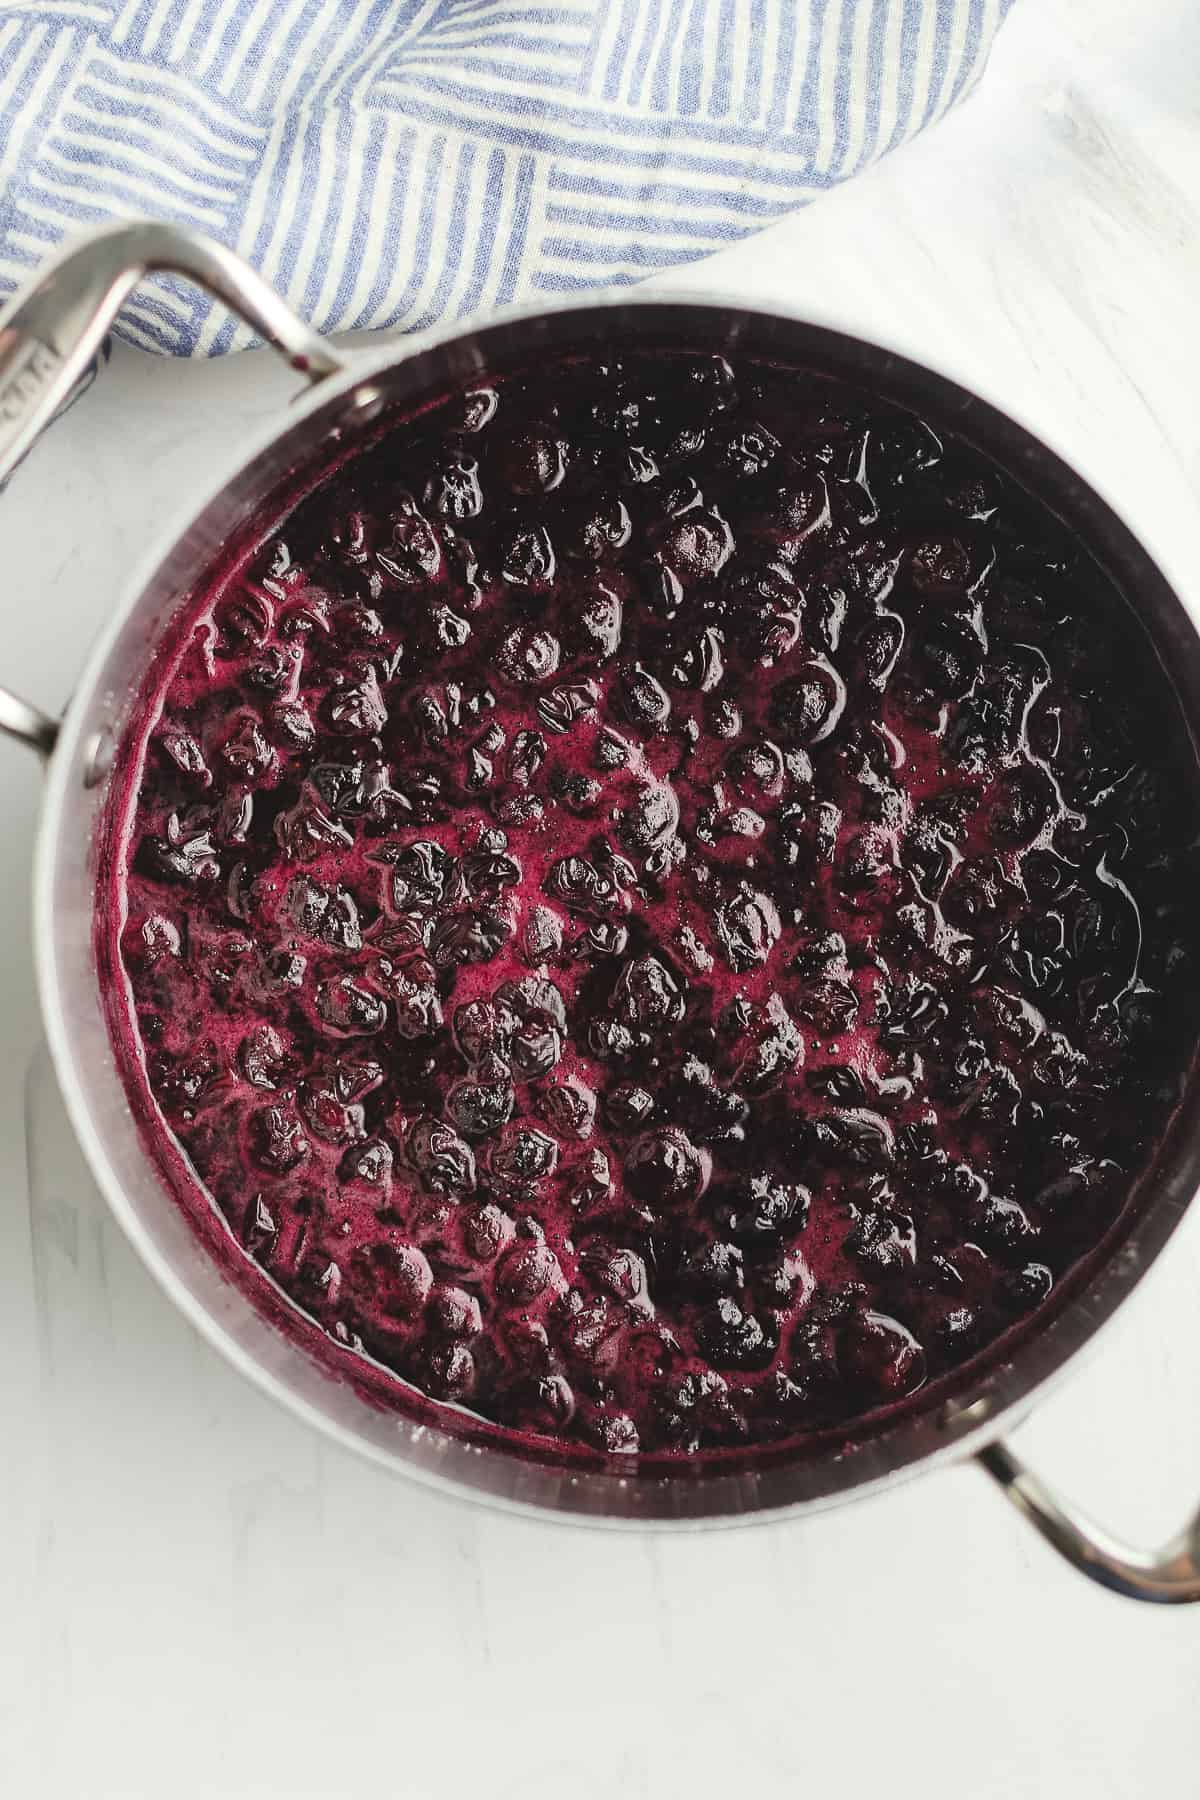 A pan of cooked blueberries.